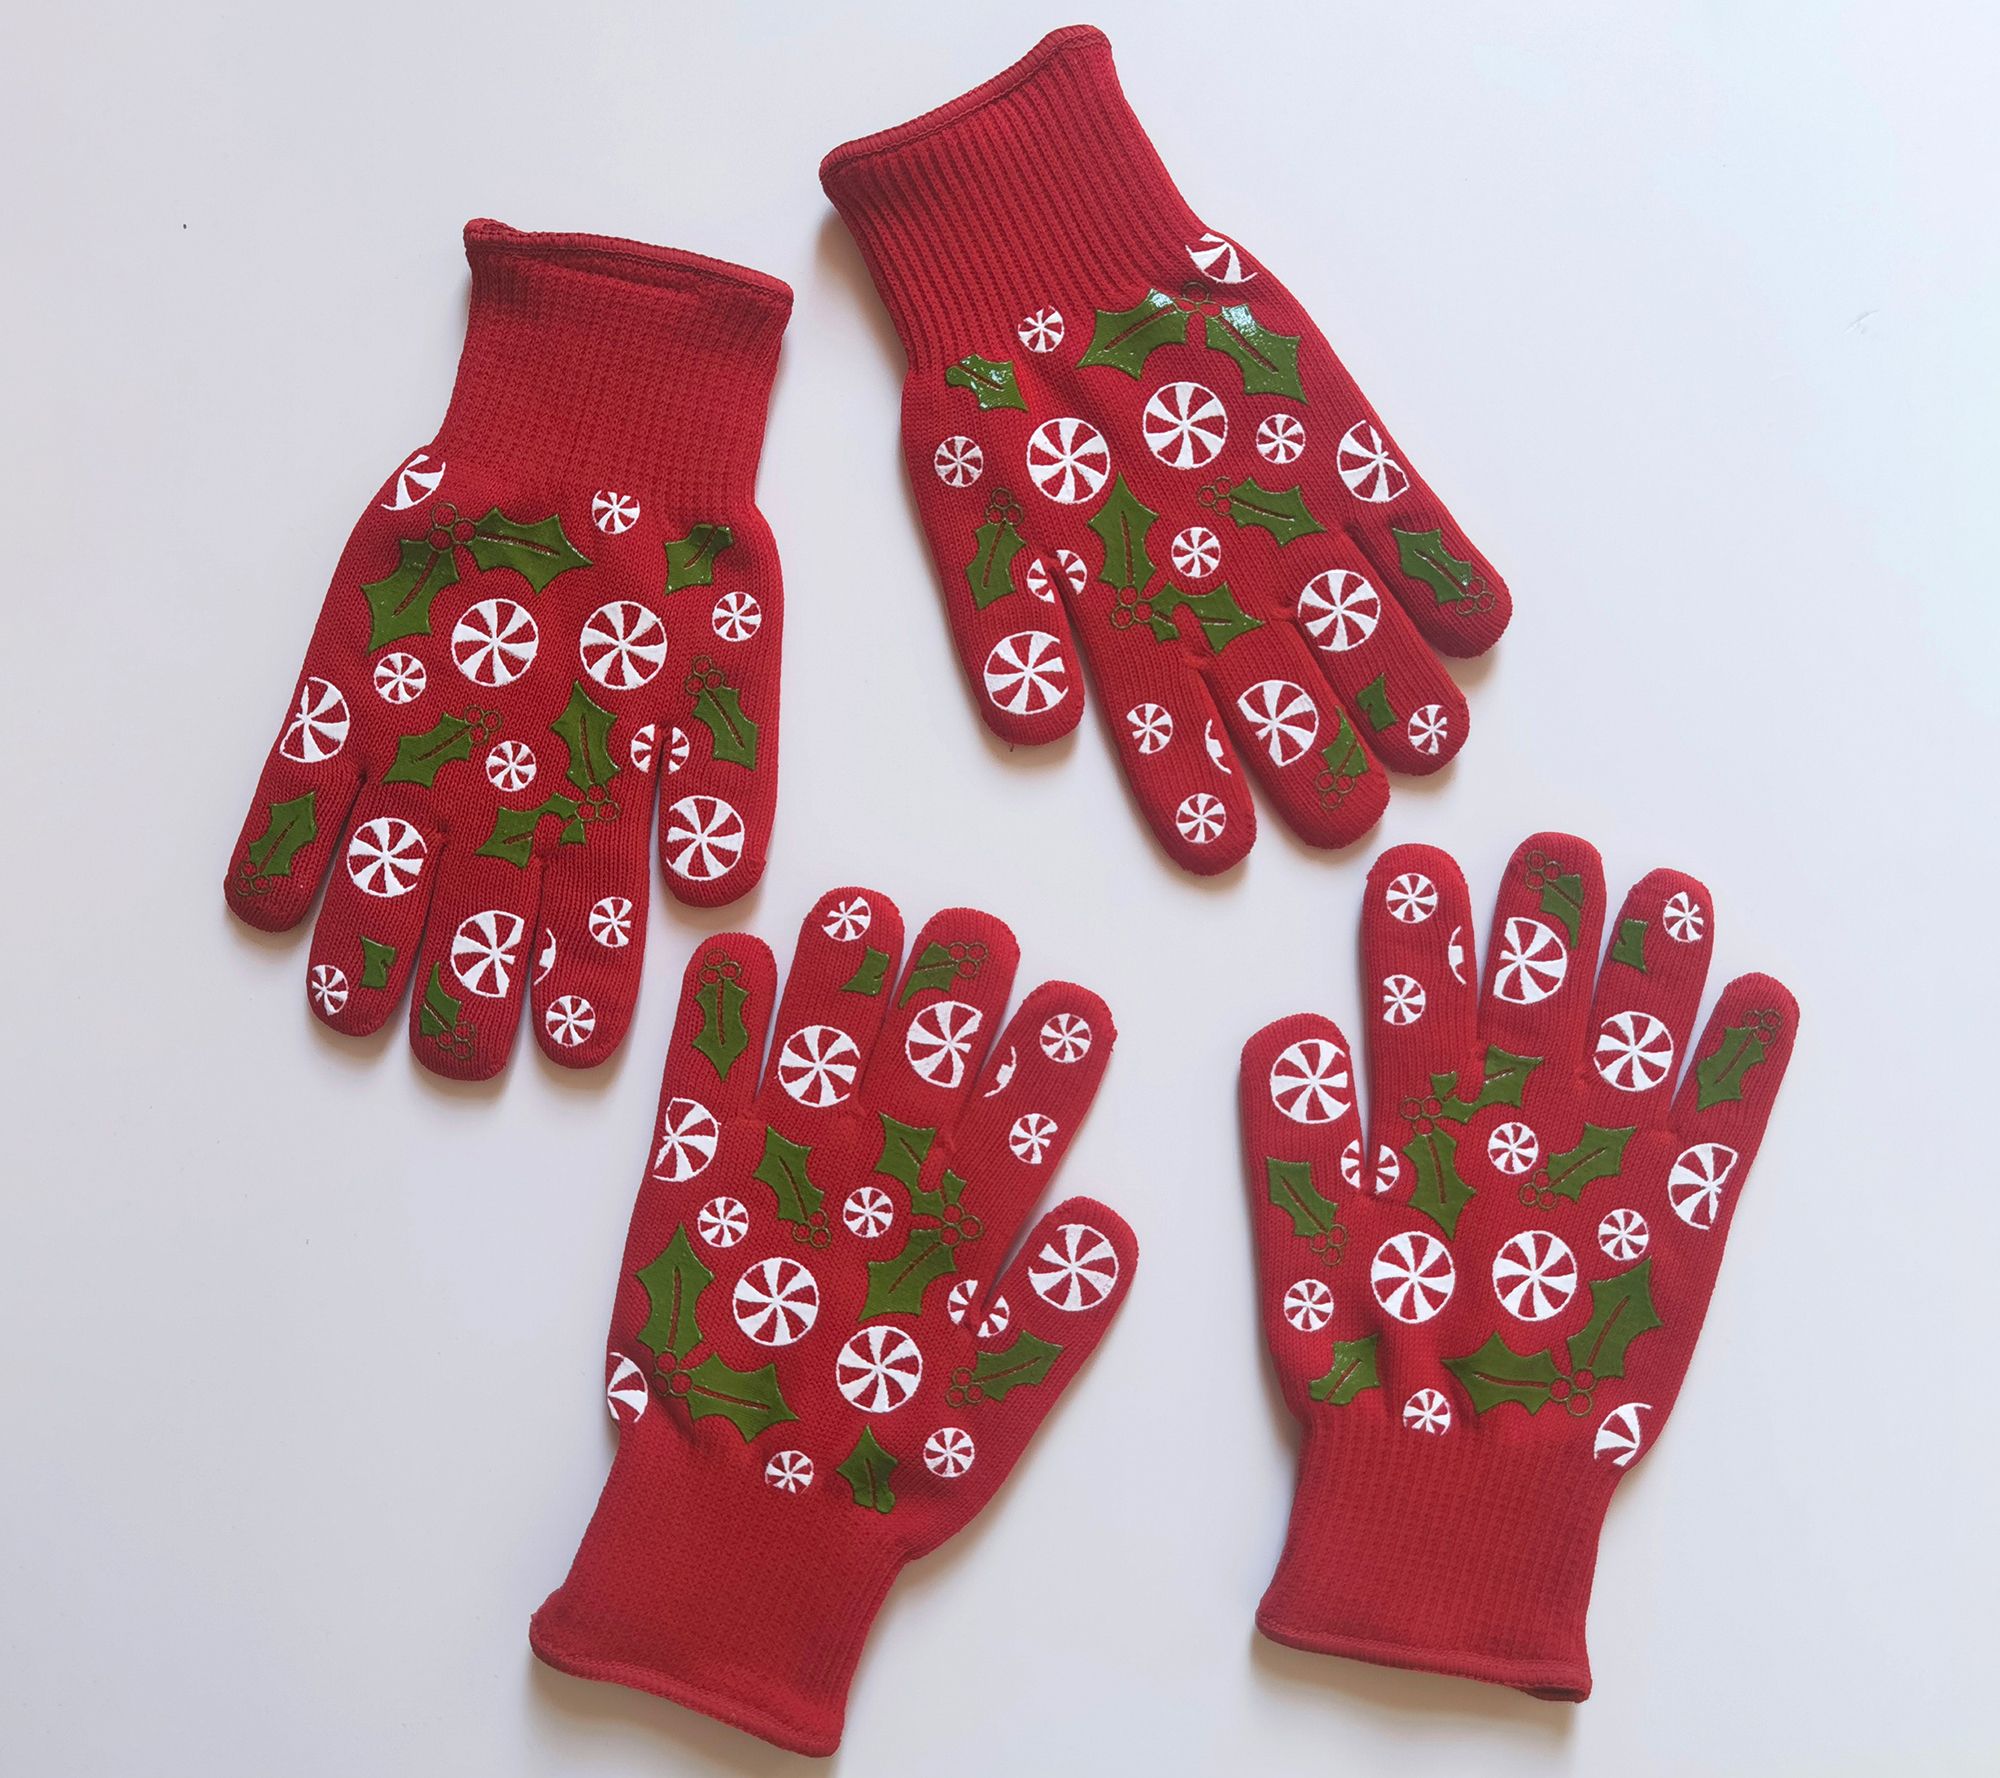 TEMP-TATIONS OVEN SAFE GLOVES w/SILICONE ACCENTS “ICE CREAM CONES